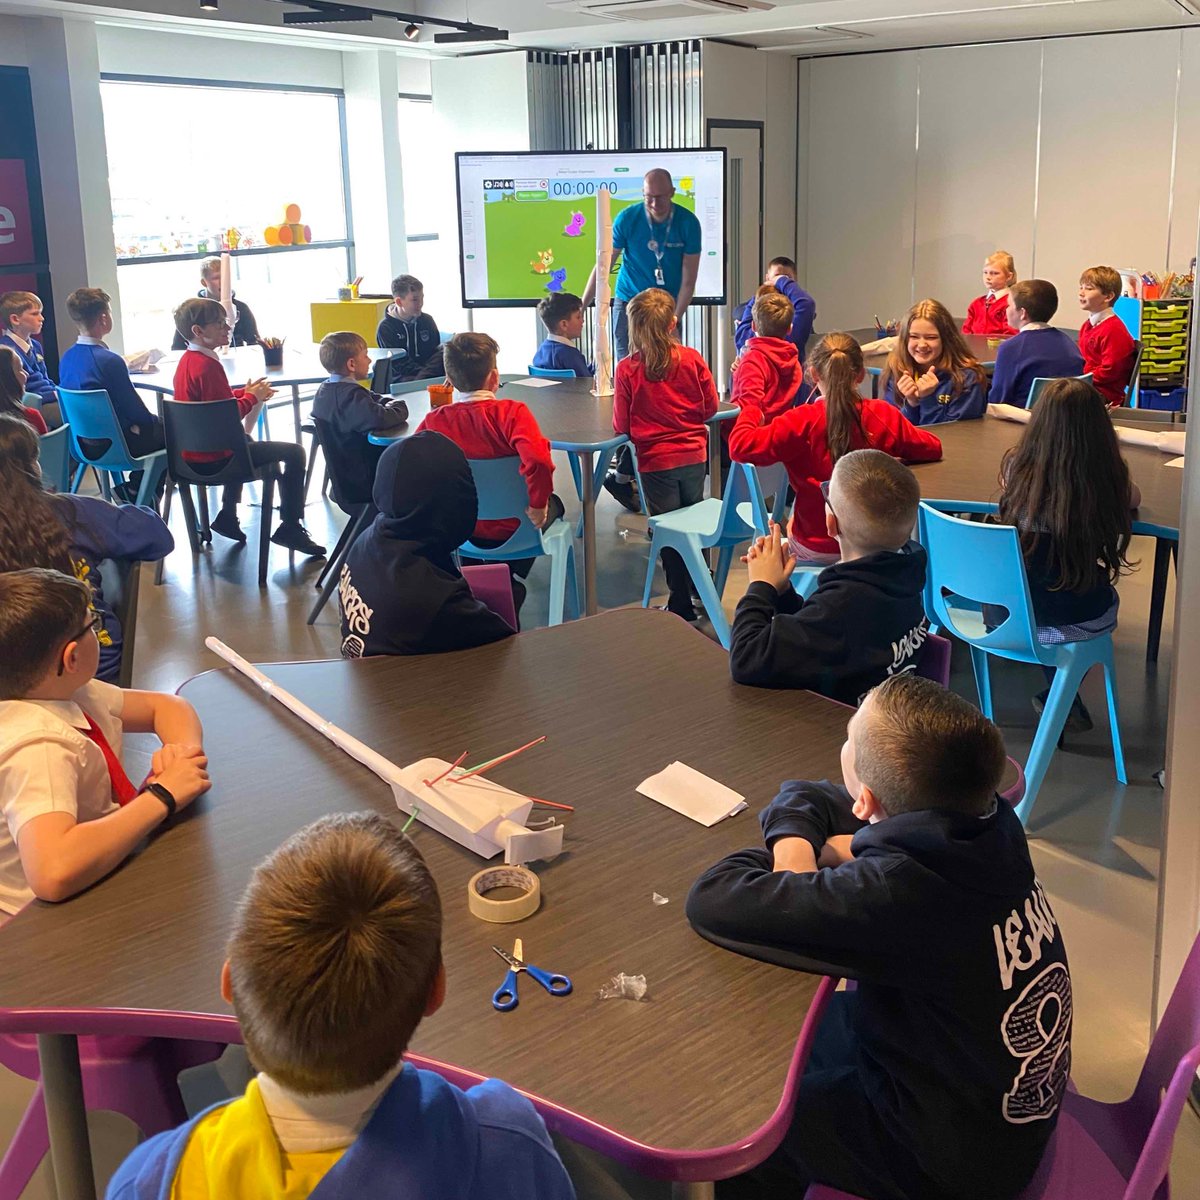 This week, Dream Space hosted a shared education workshop for Carrickmannon Primary, Alexander Dickson and St Mary's Primary. 👋 Students collaborated on building paper towers, problem-solving, and coding using BBC micro:bits! 💡